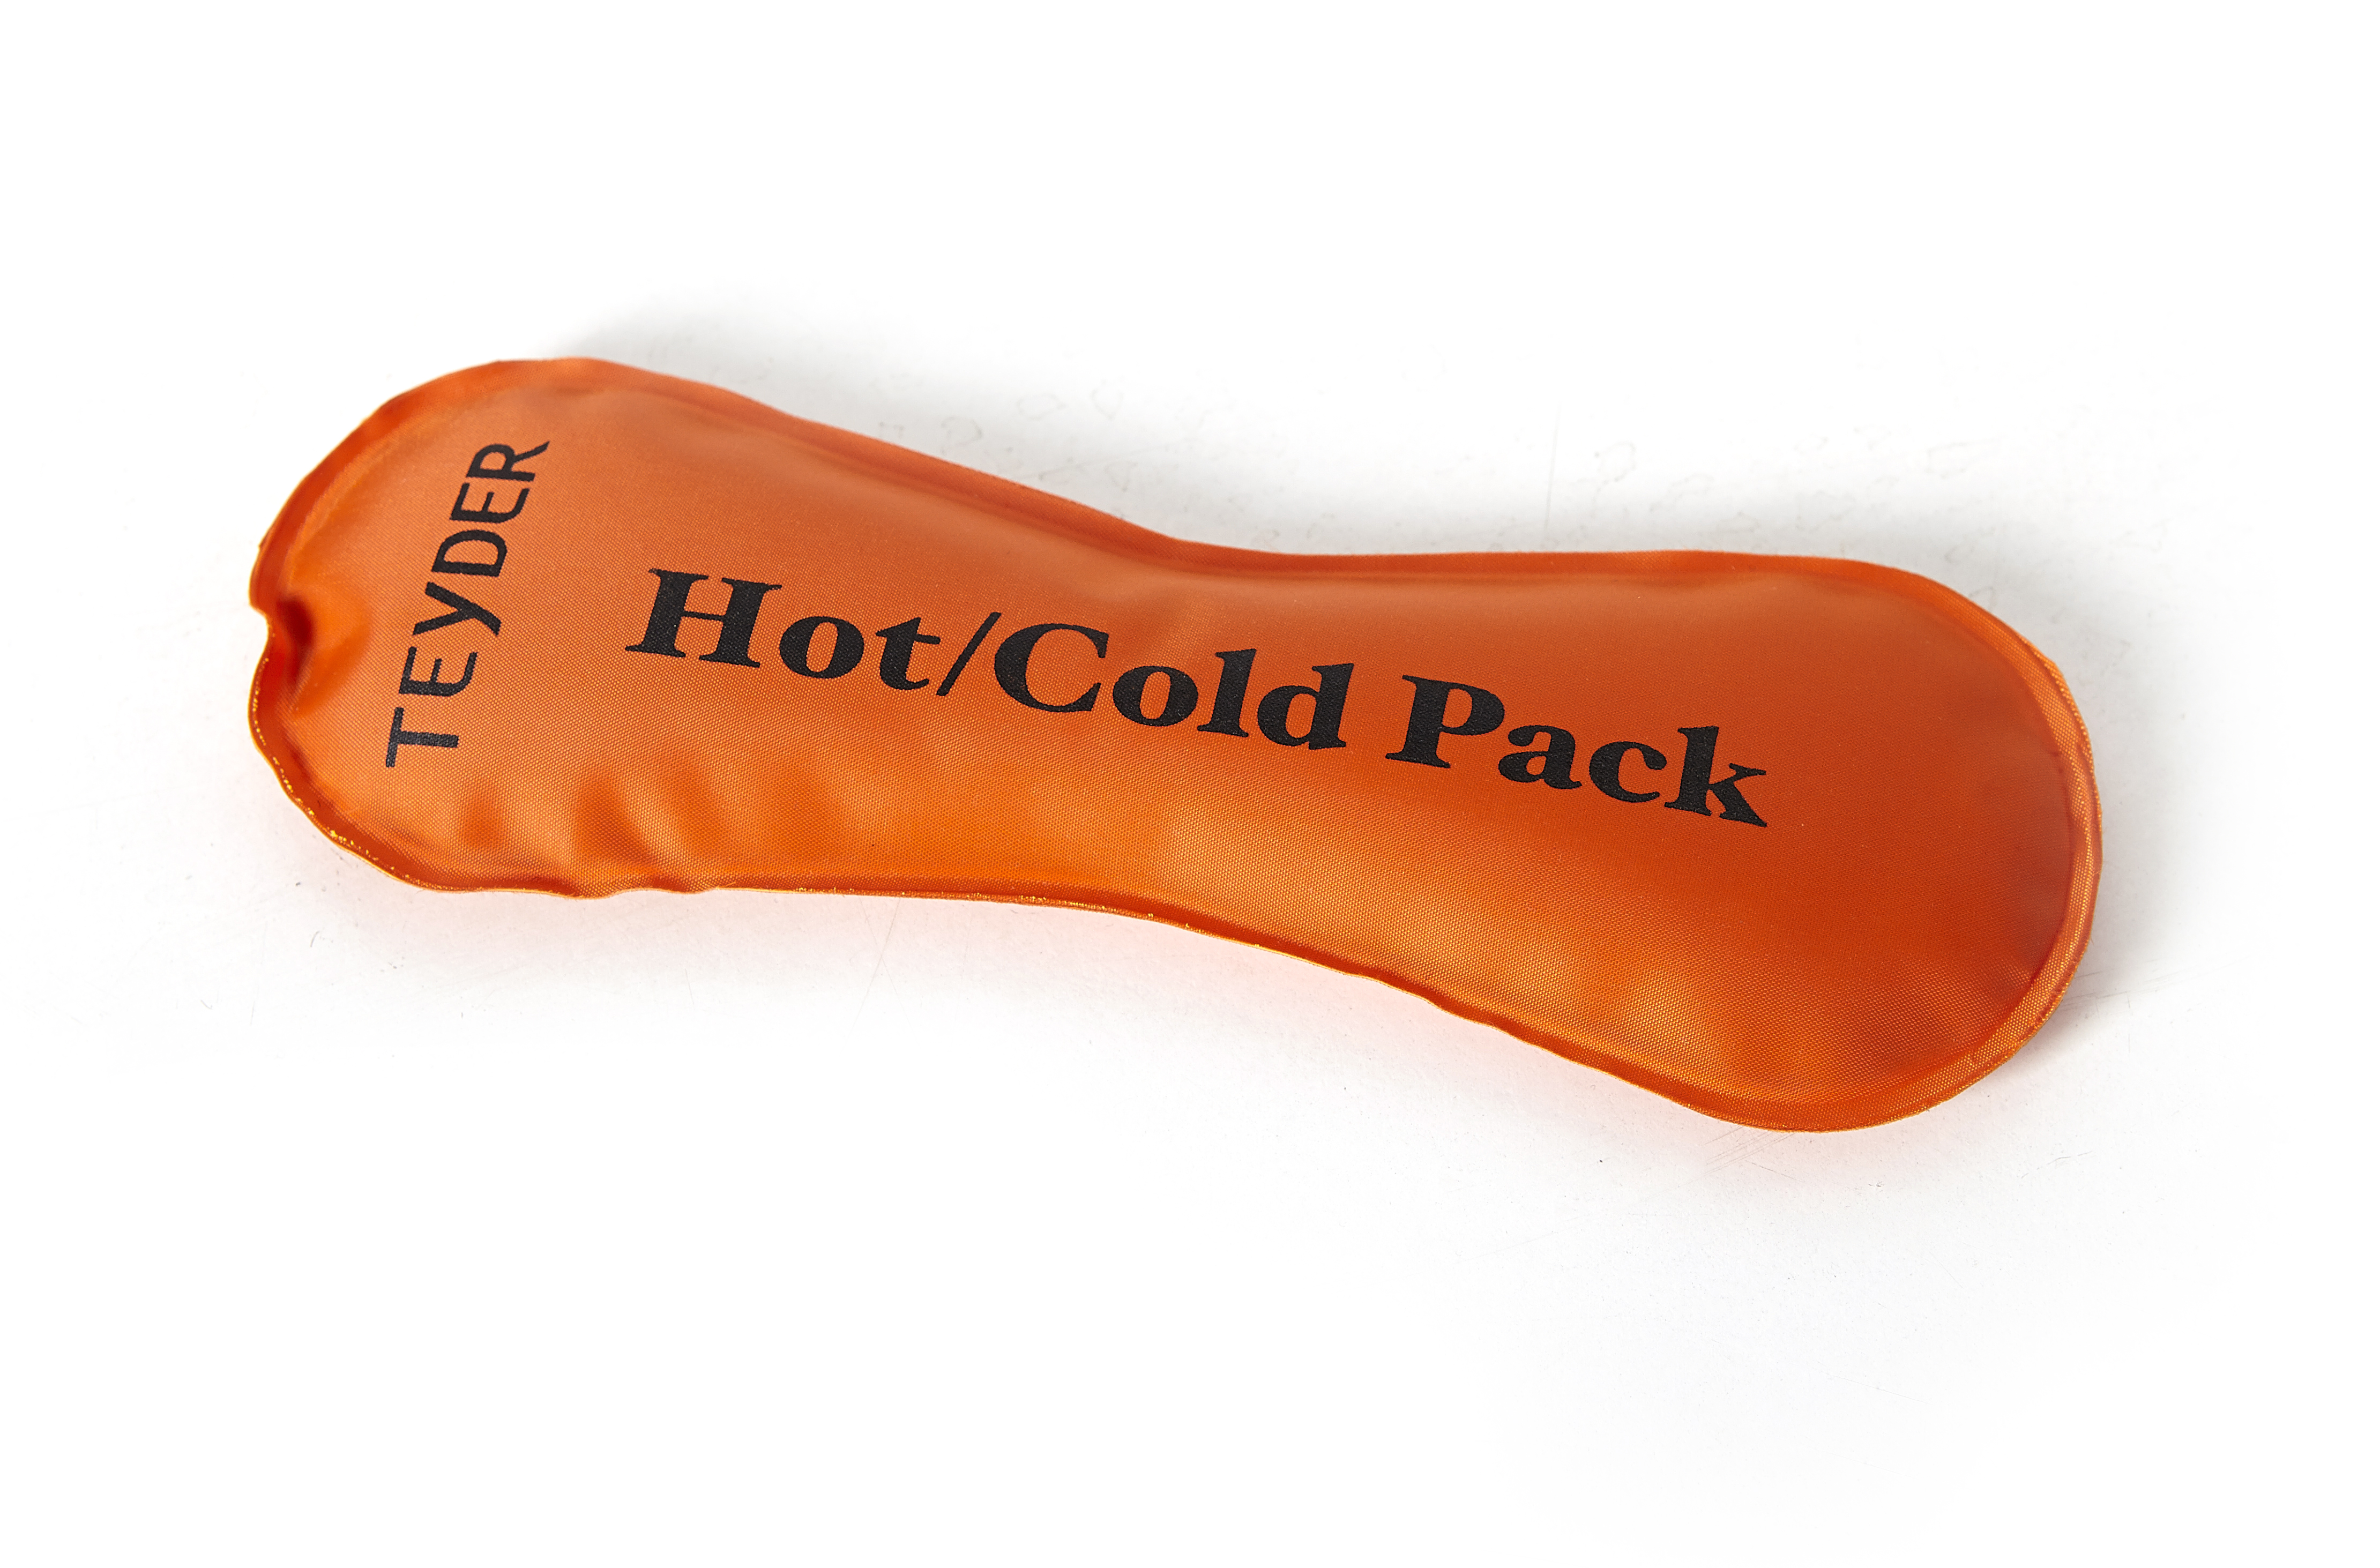 Hot and Cold Lumbar Support